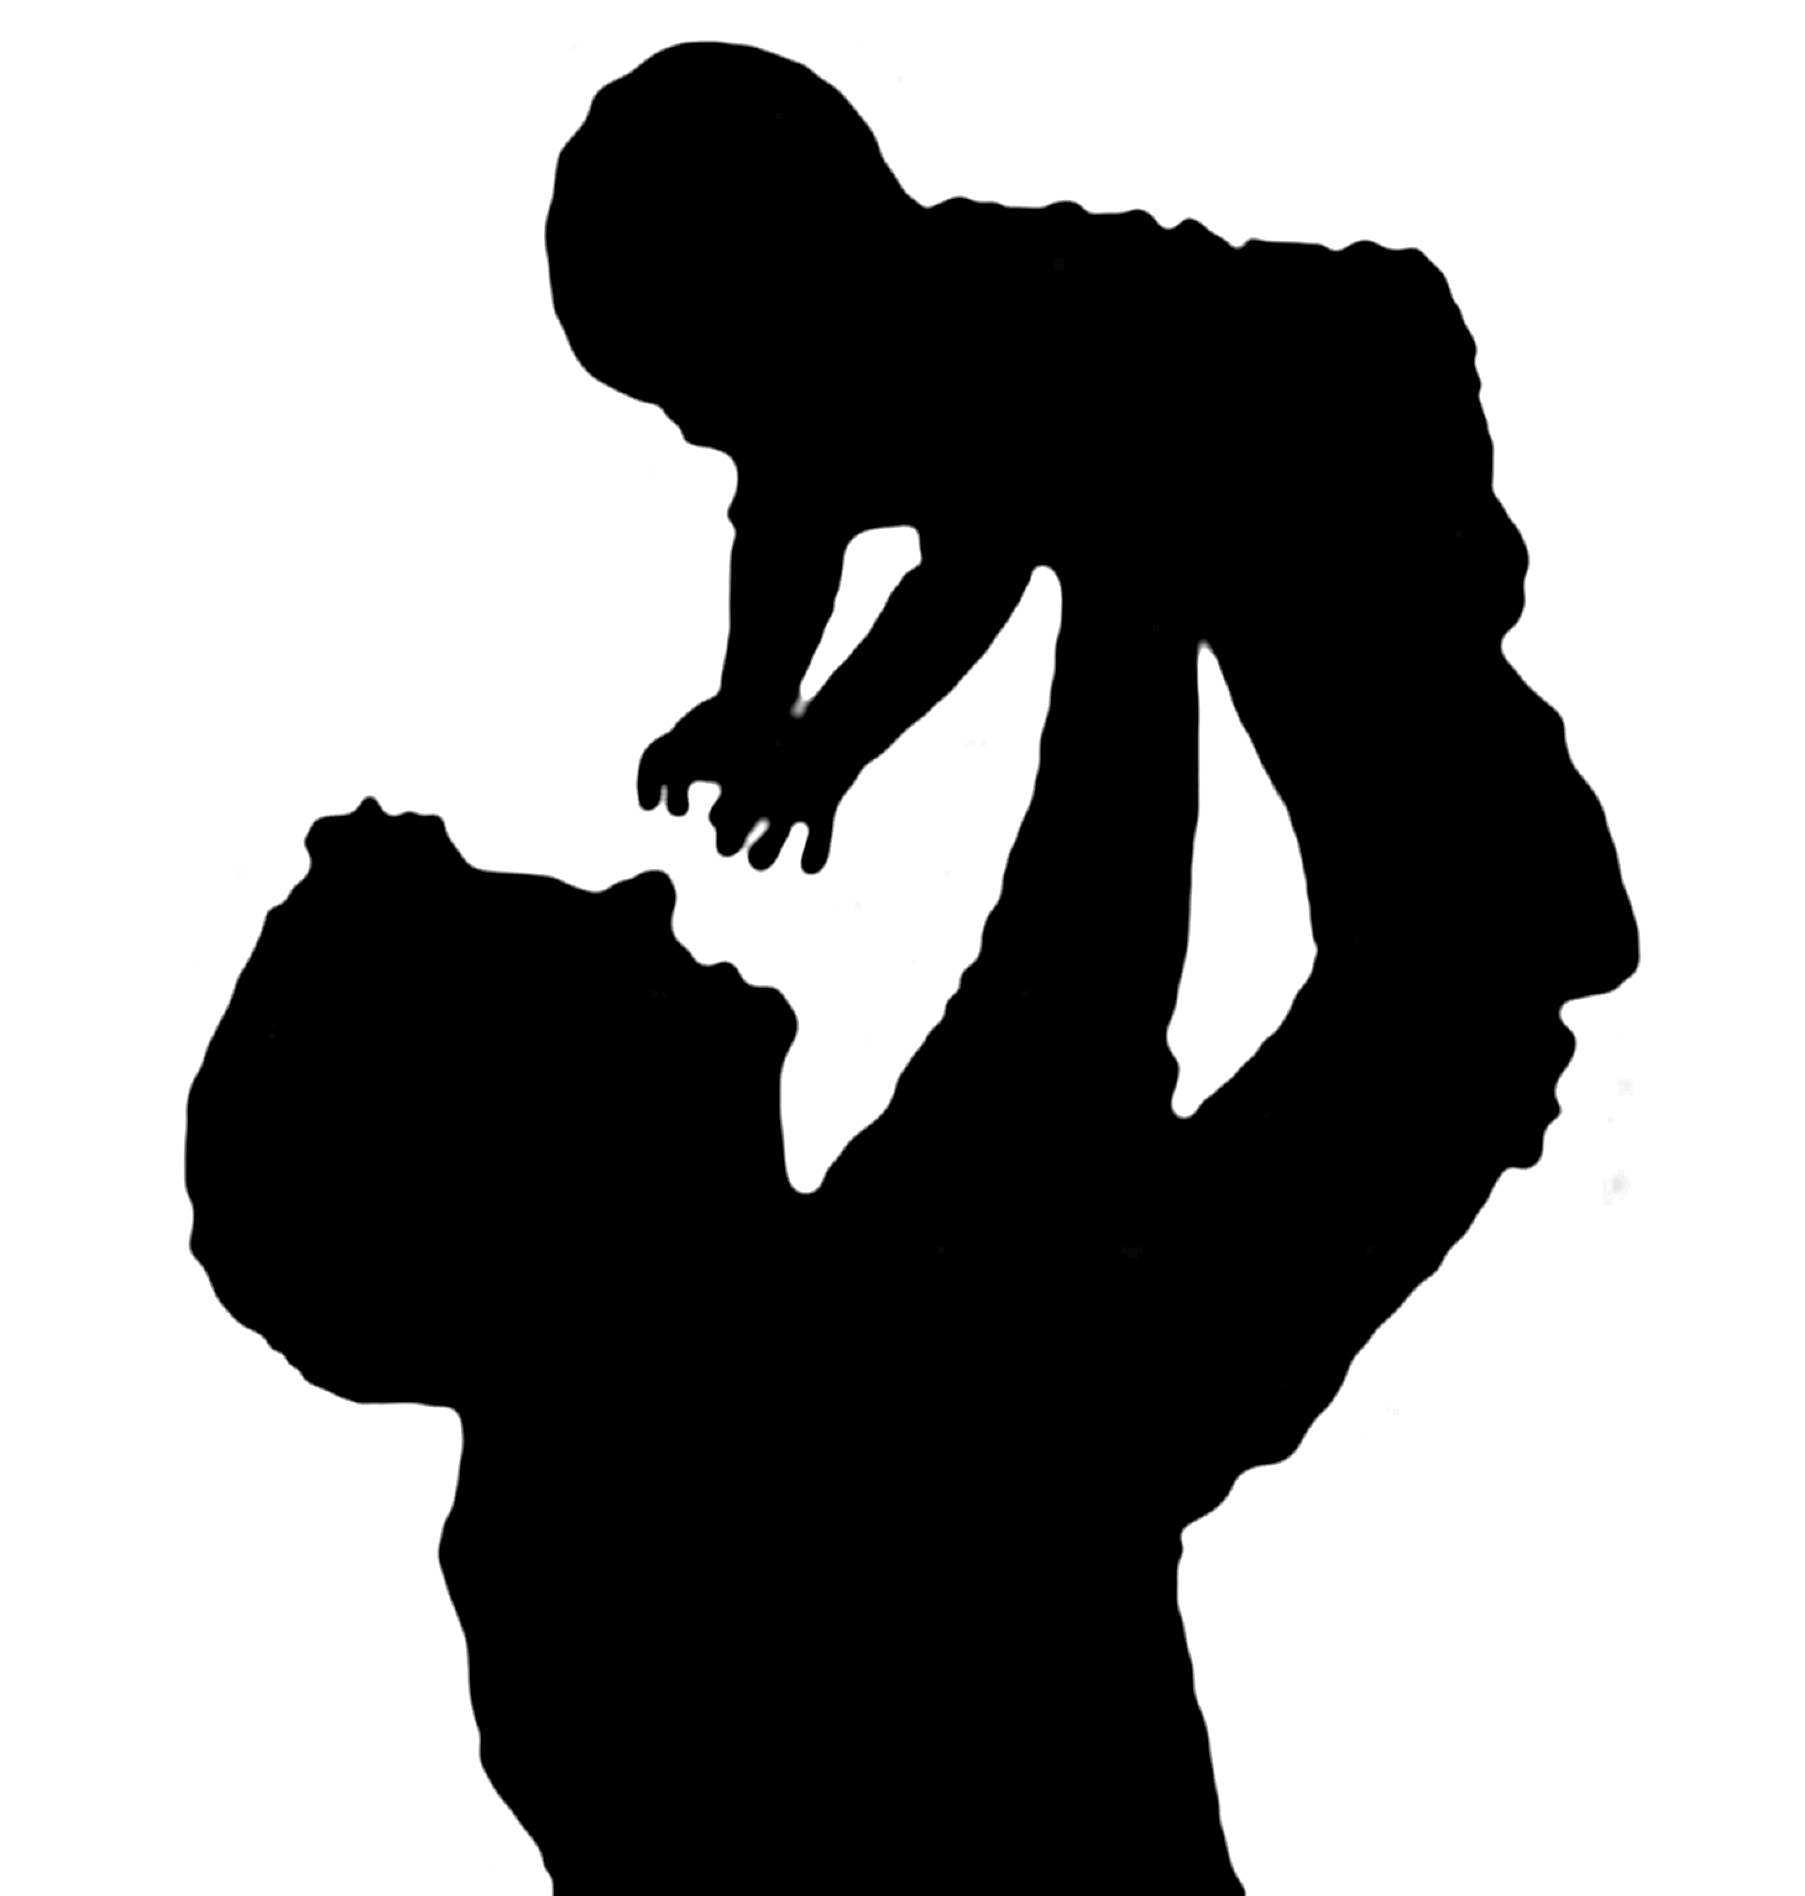 Father Clipart | Clipart Panda - Free Clipart Images